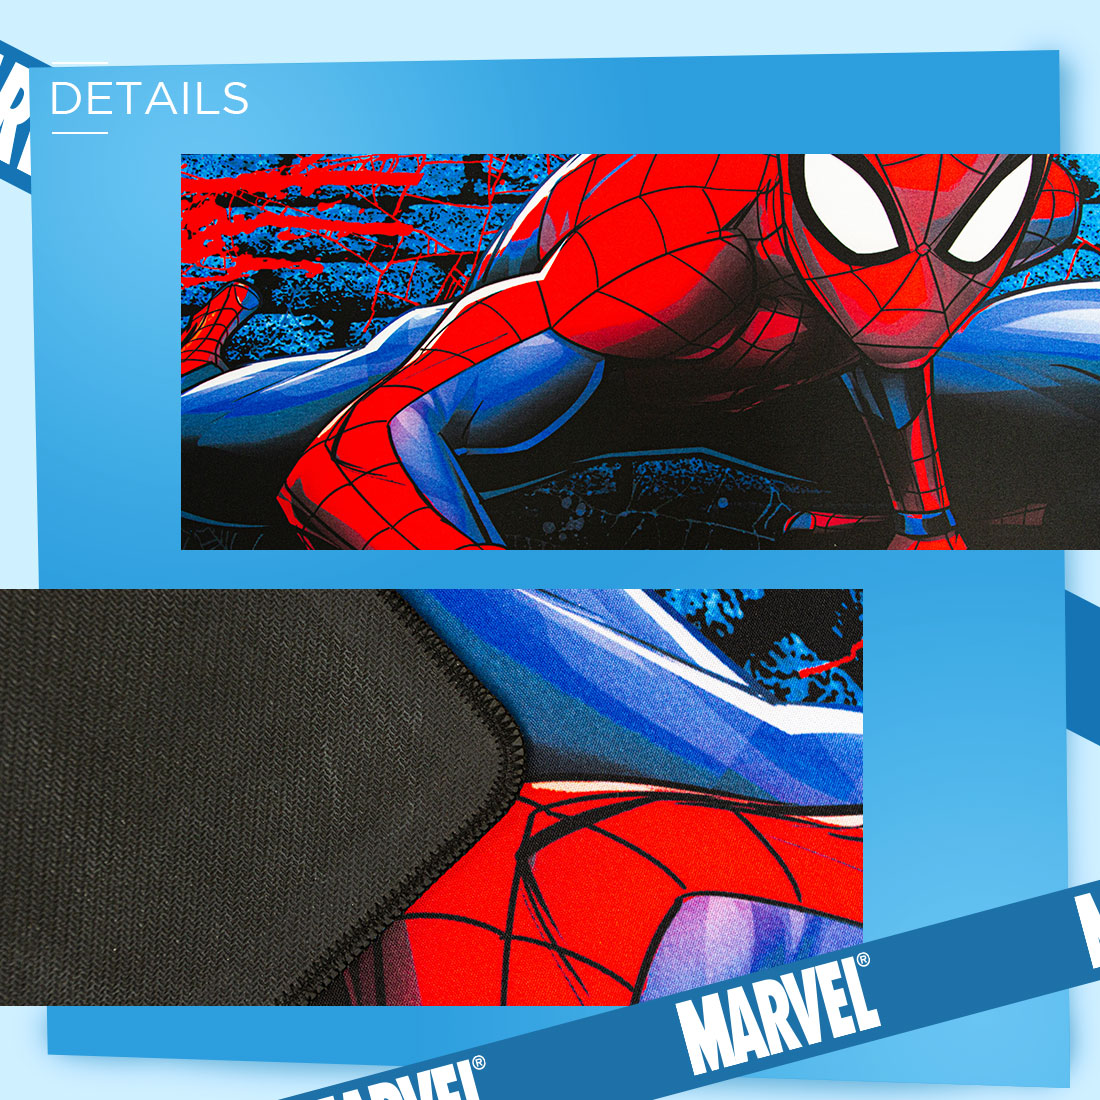 MINISO Marvel Desk Pad Office Non-Slip Desk Cover Protector Desk Mat Mouse Pads Desk Writing Mat for Office and Home Work Spiderman - image 5 of 7